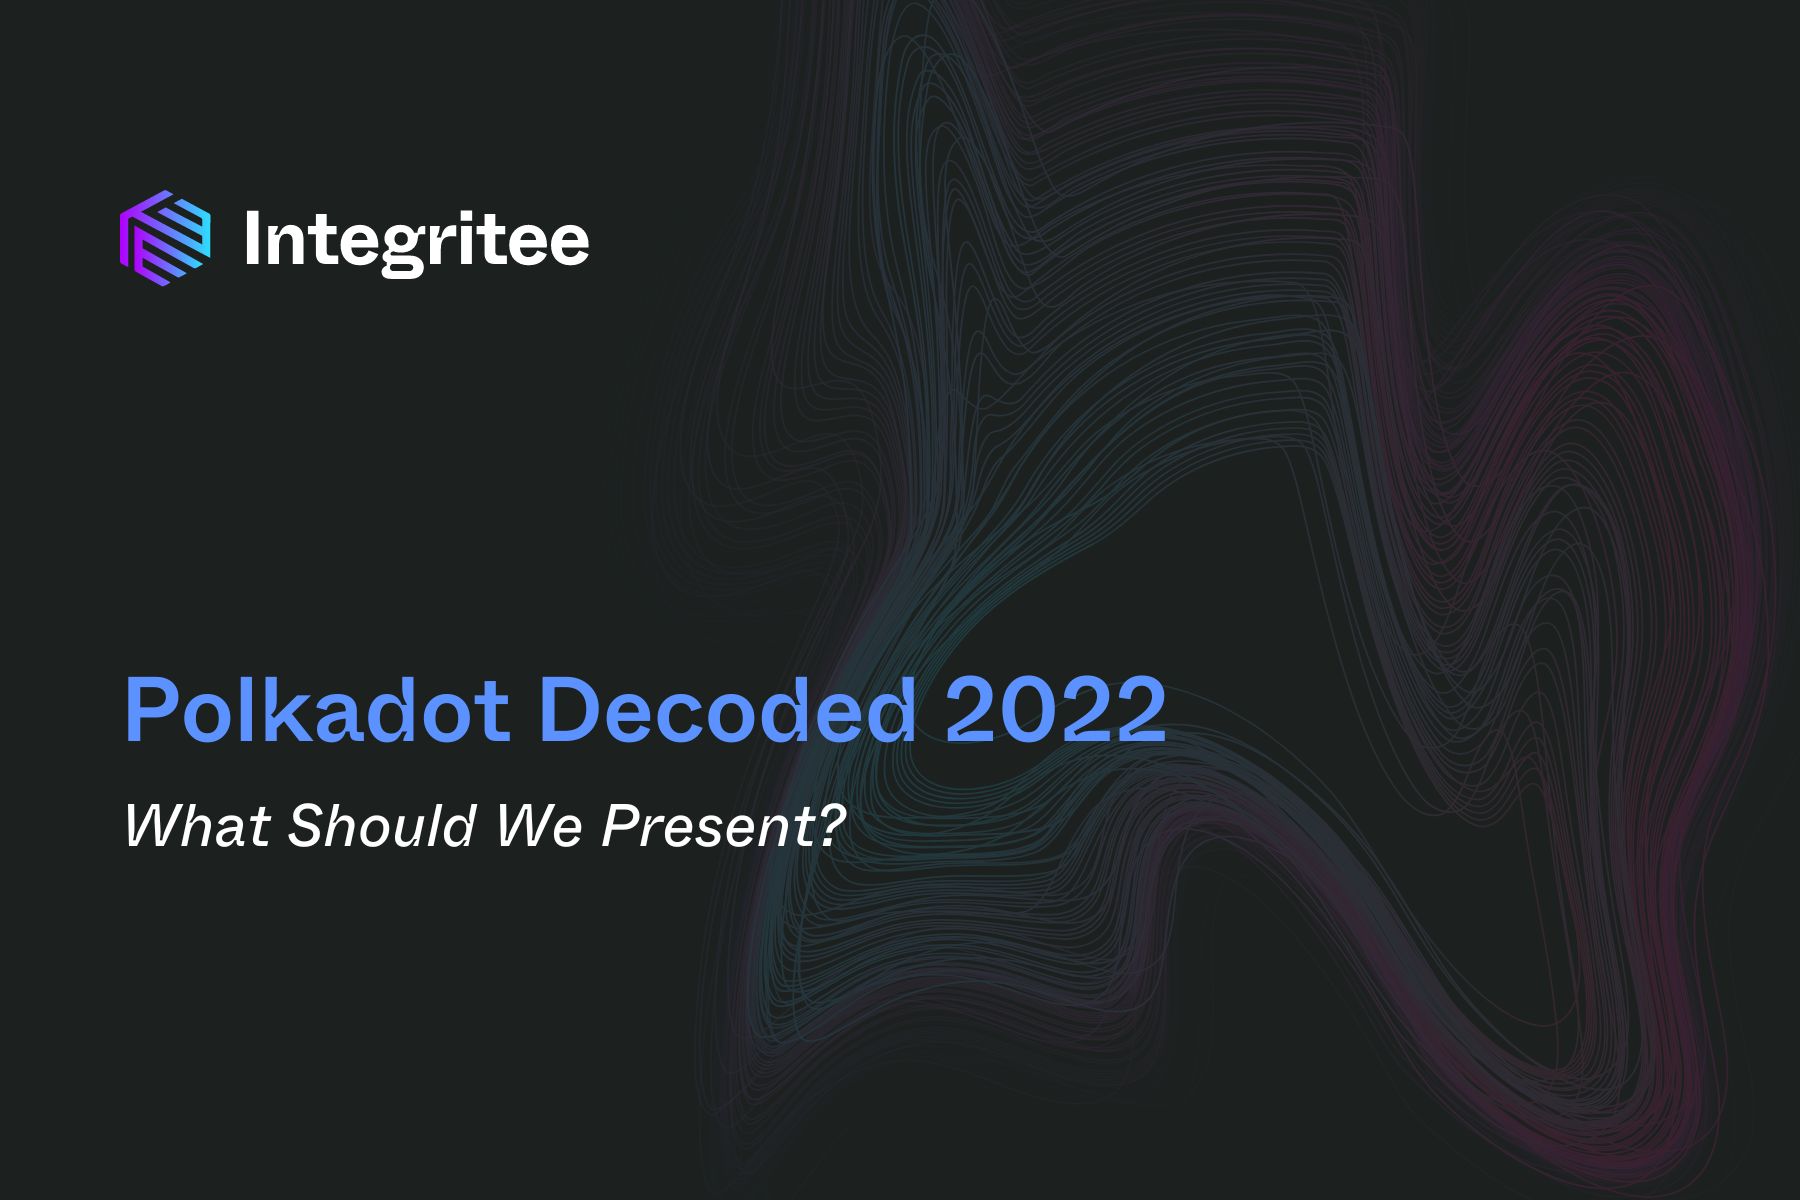 What Should Integritee Present at Polkadot Decoded 2022? You Decide.